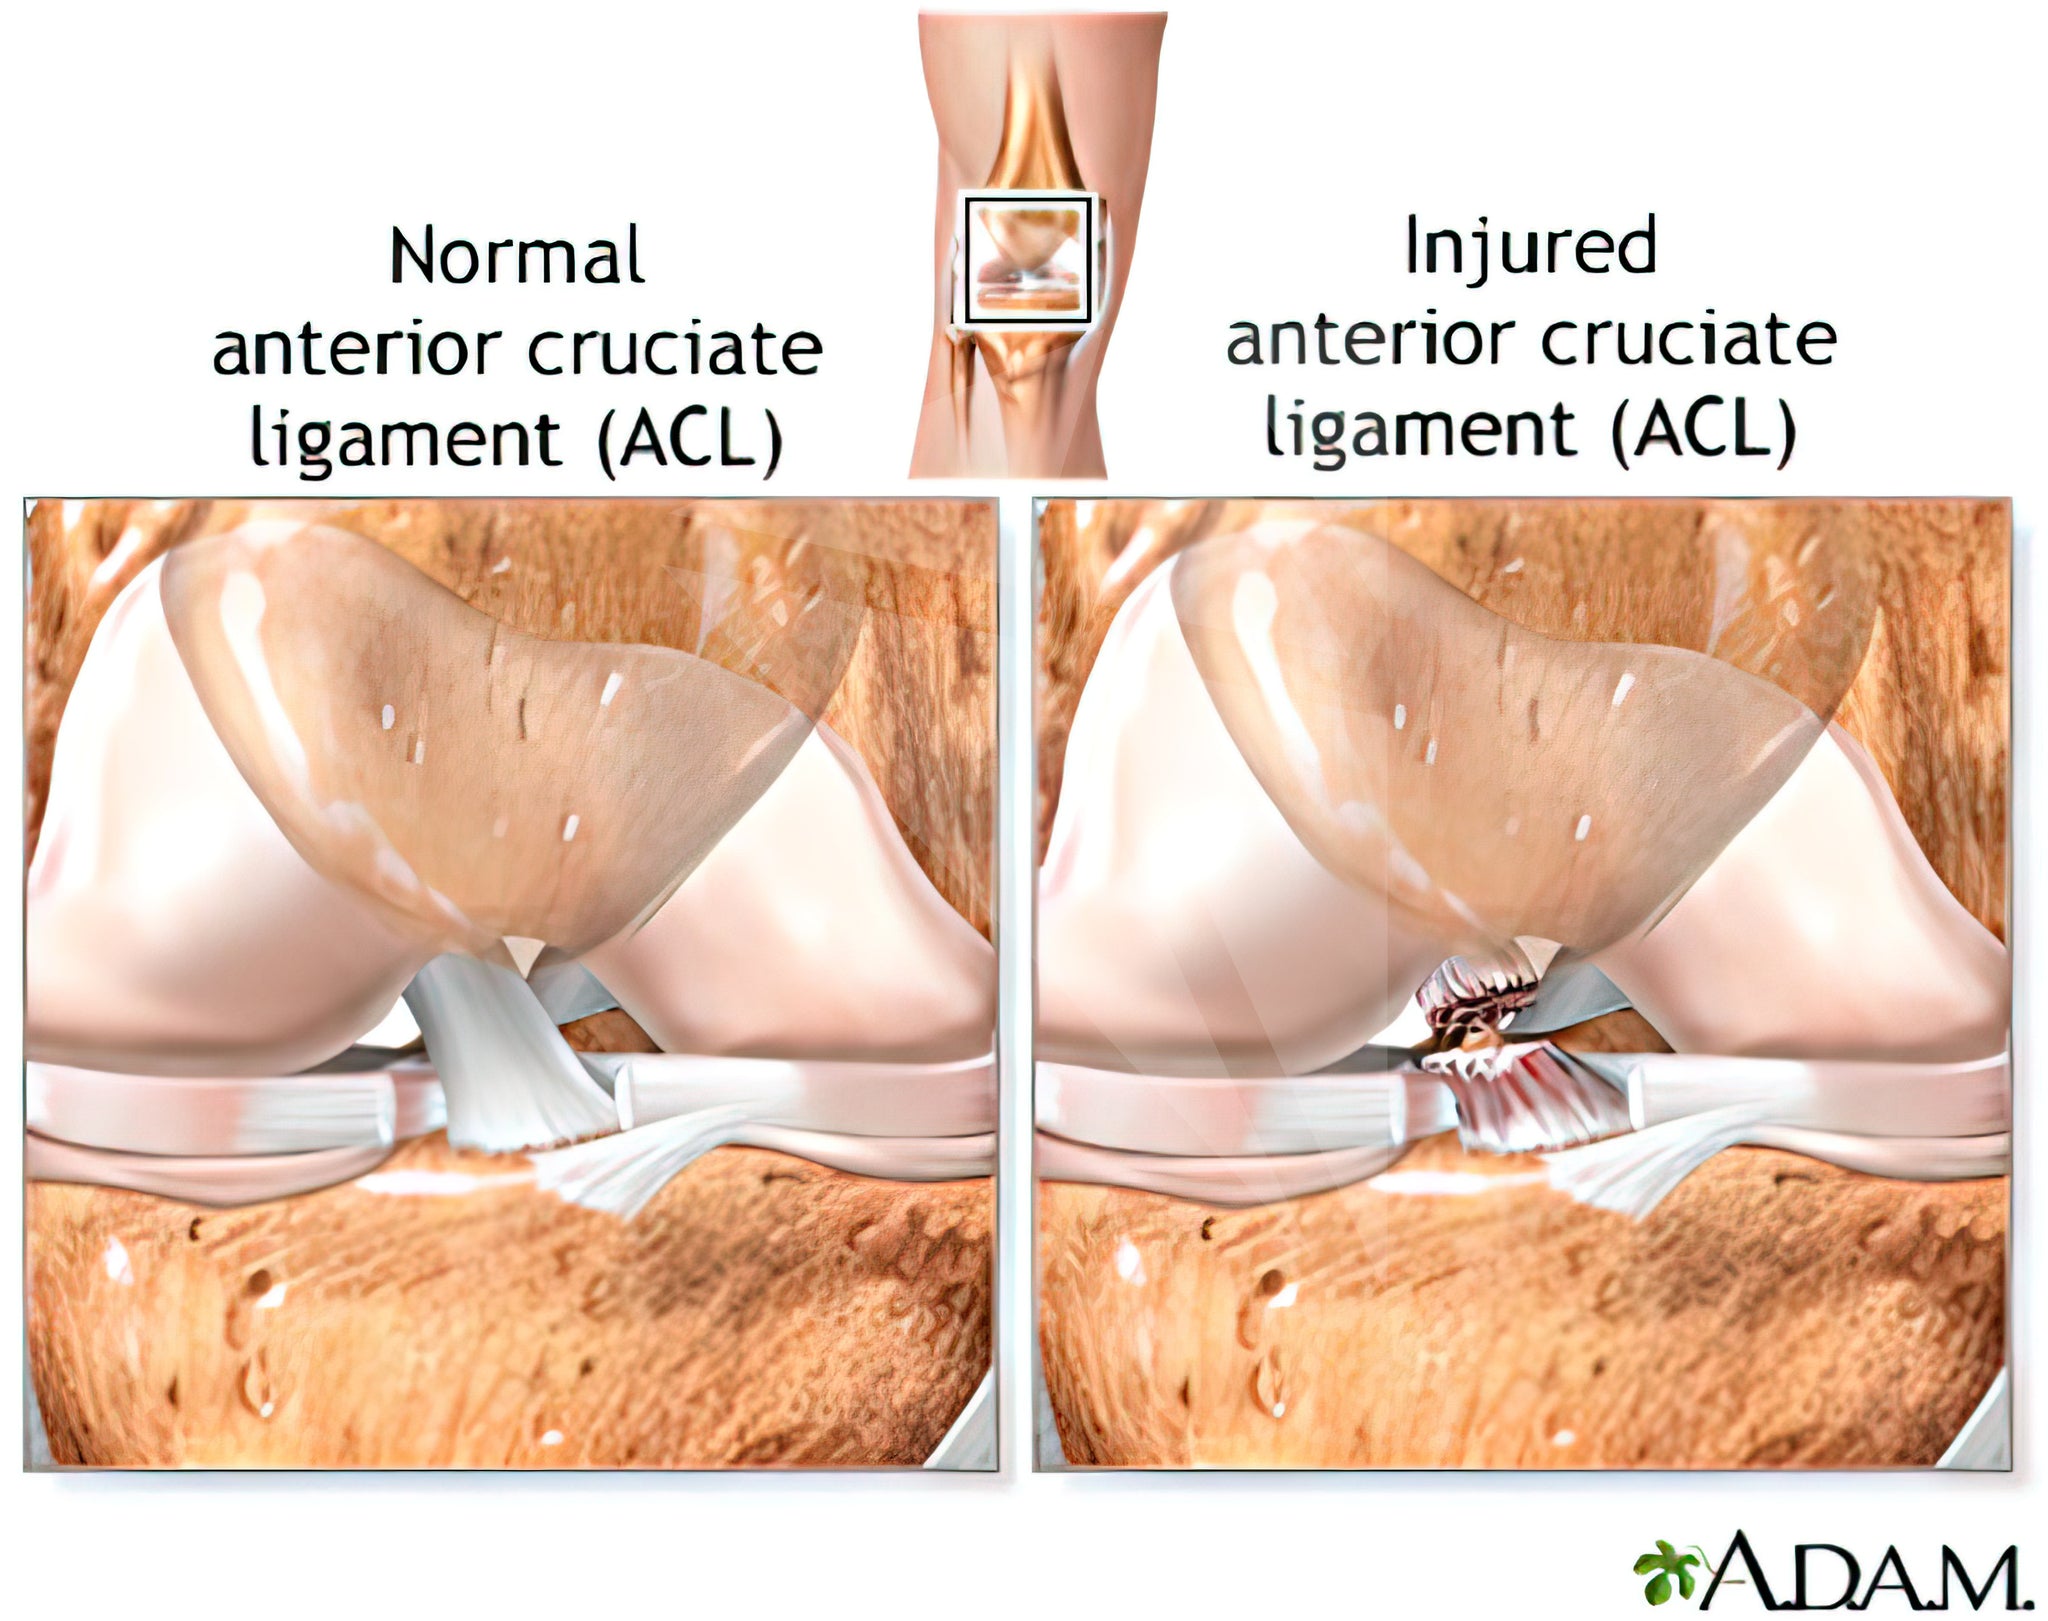 Normal anterior cruciate ligament (ACL) vs injured anterior cruciate ligament (a common football injury)